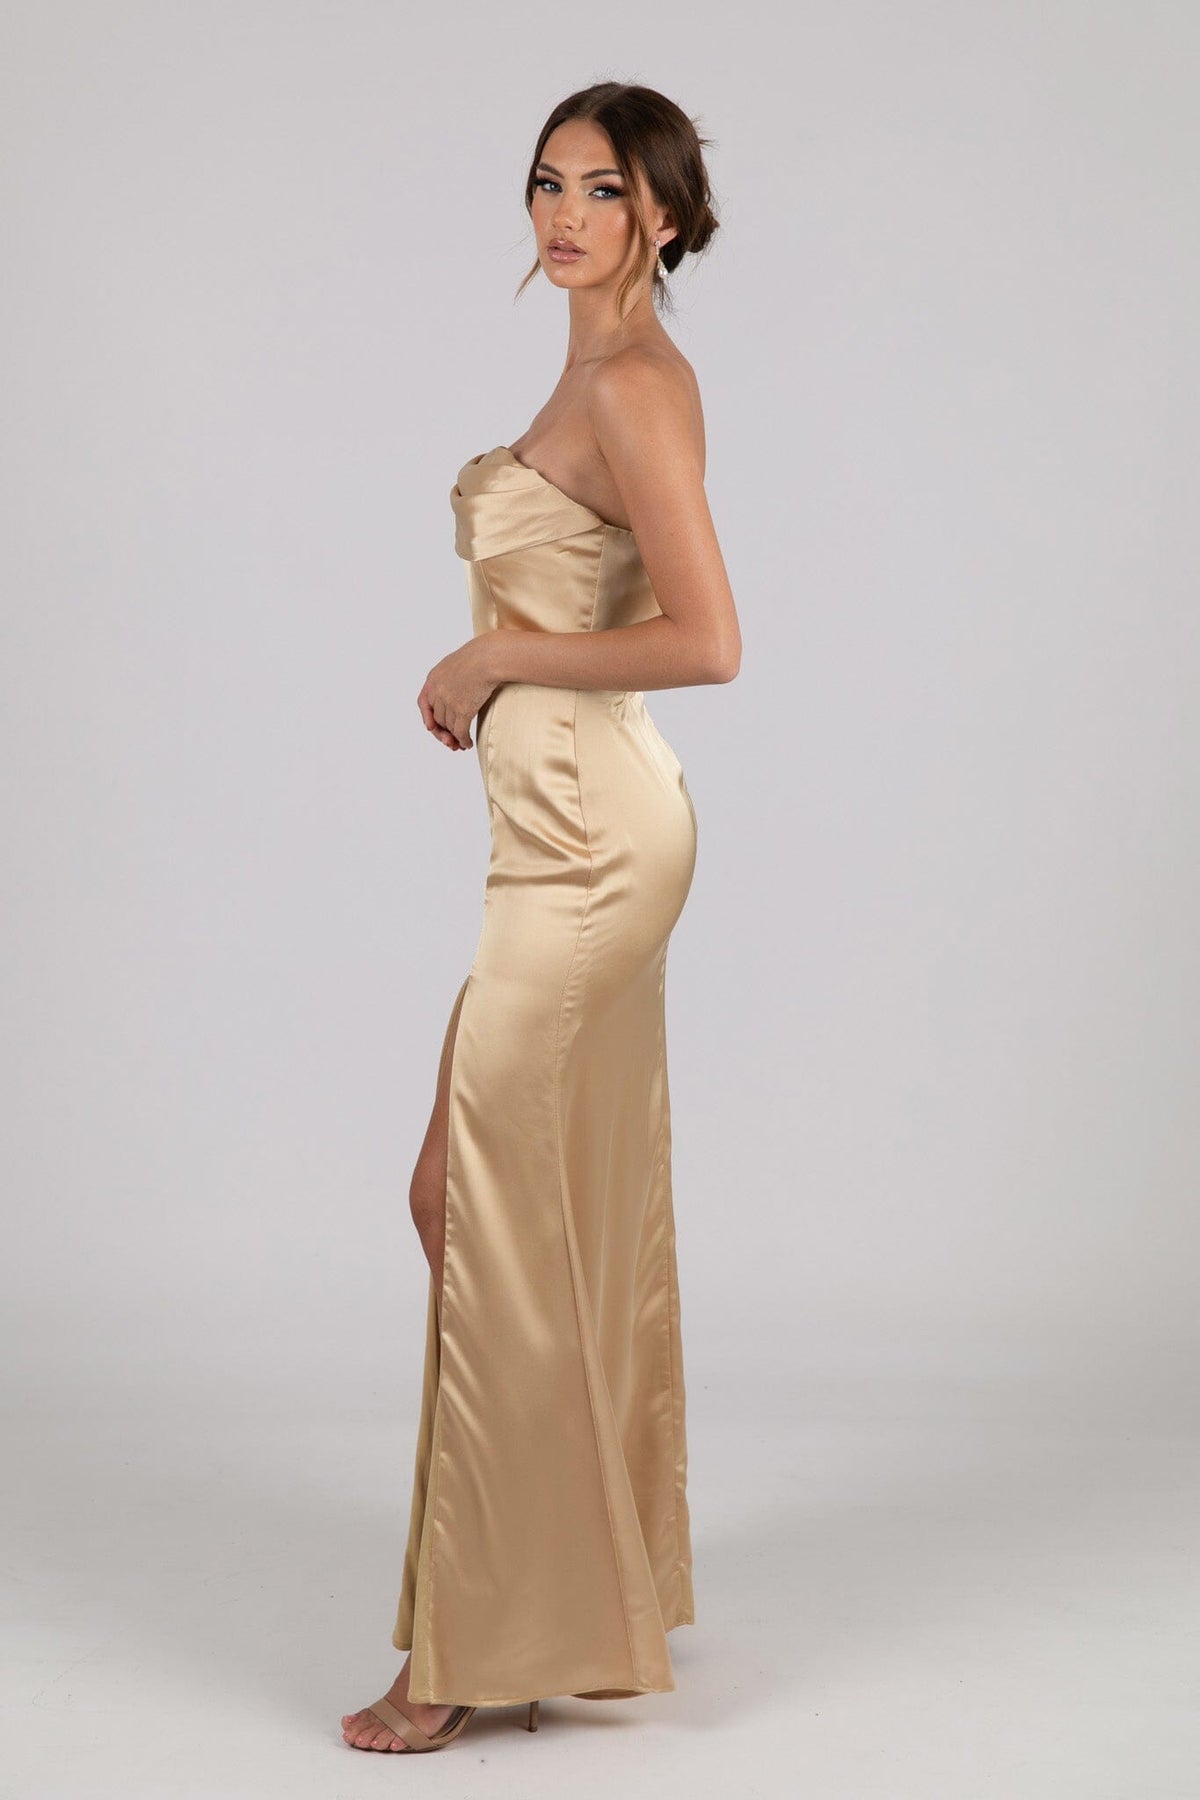 Side Image of Neutral Gold Champagne Coloured Strapless Satin Maxi Dress with Draped Detail at Bust and Side Slit